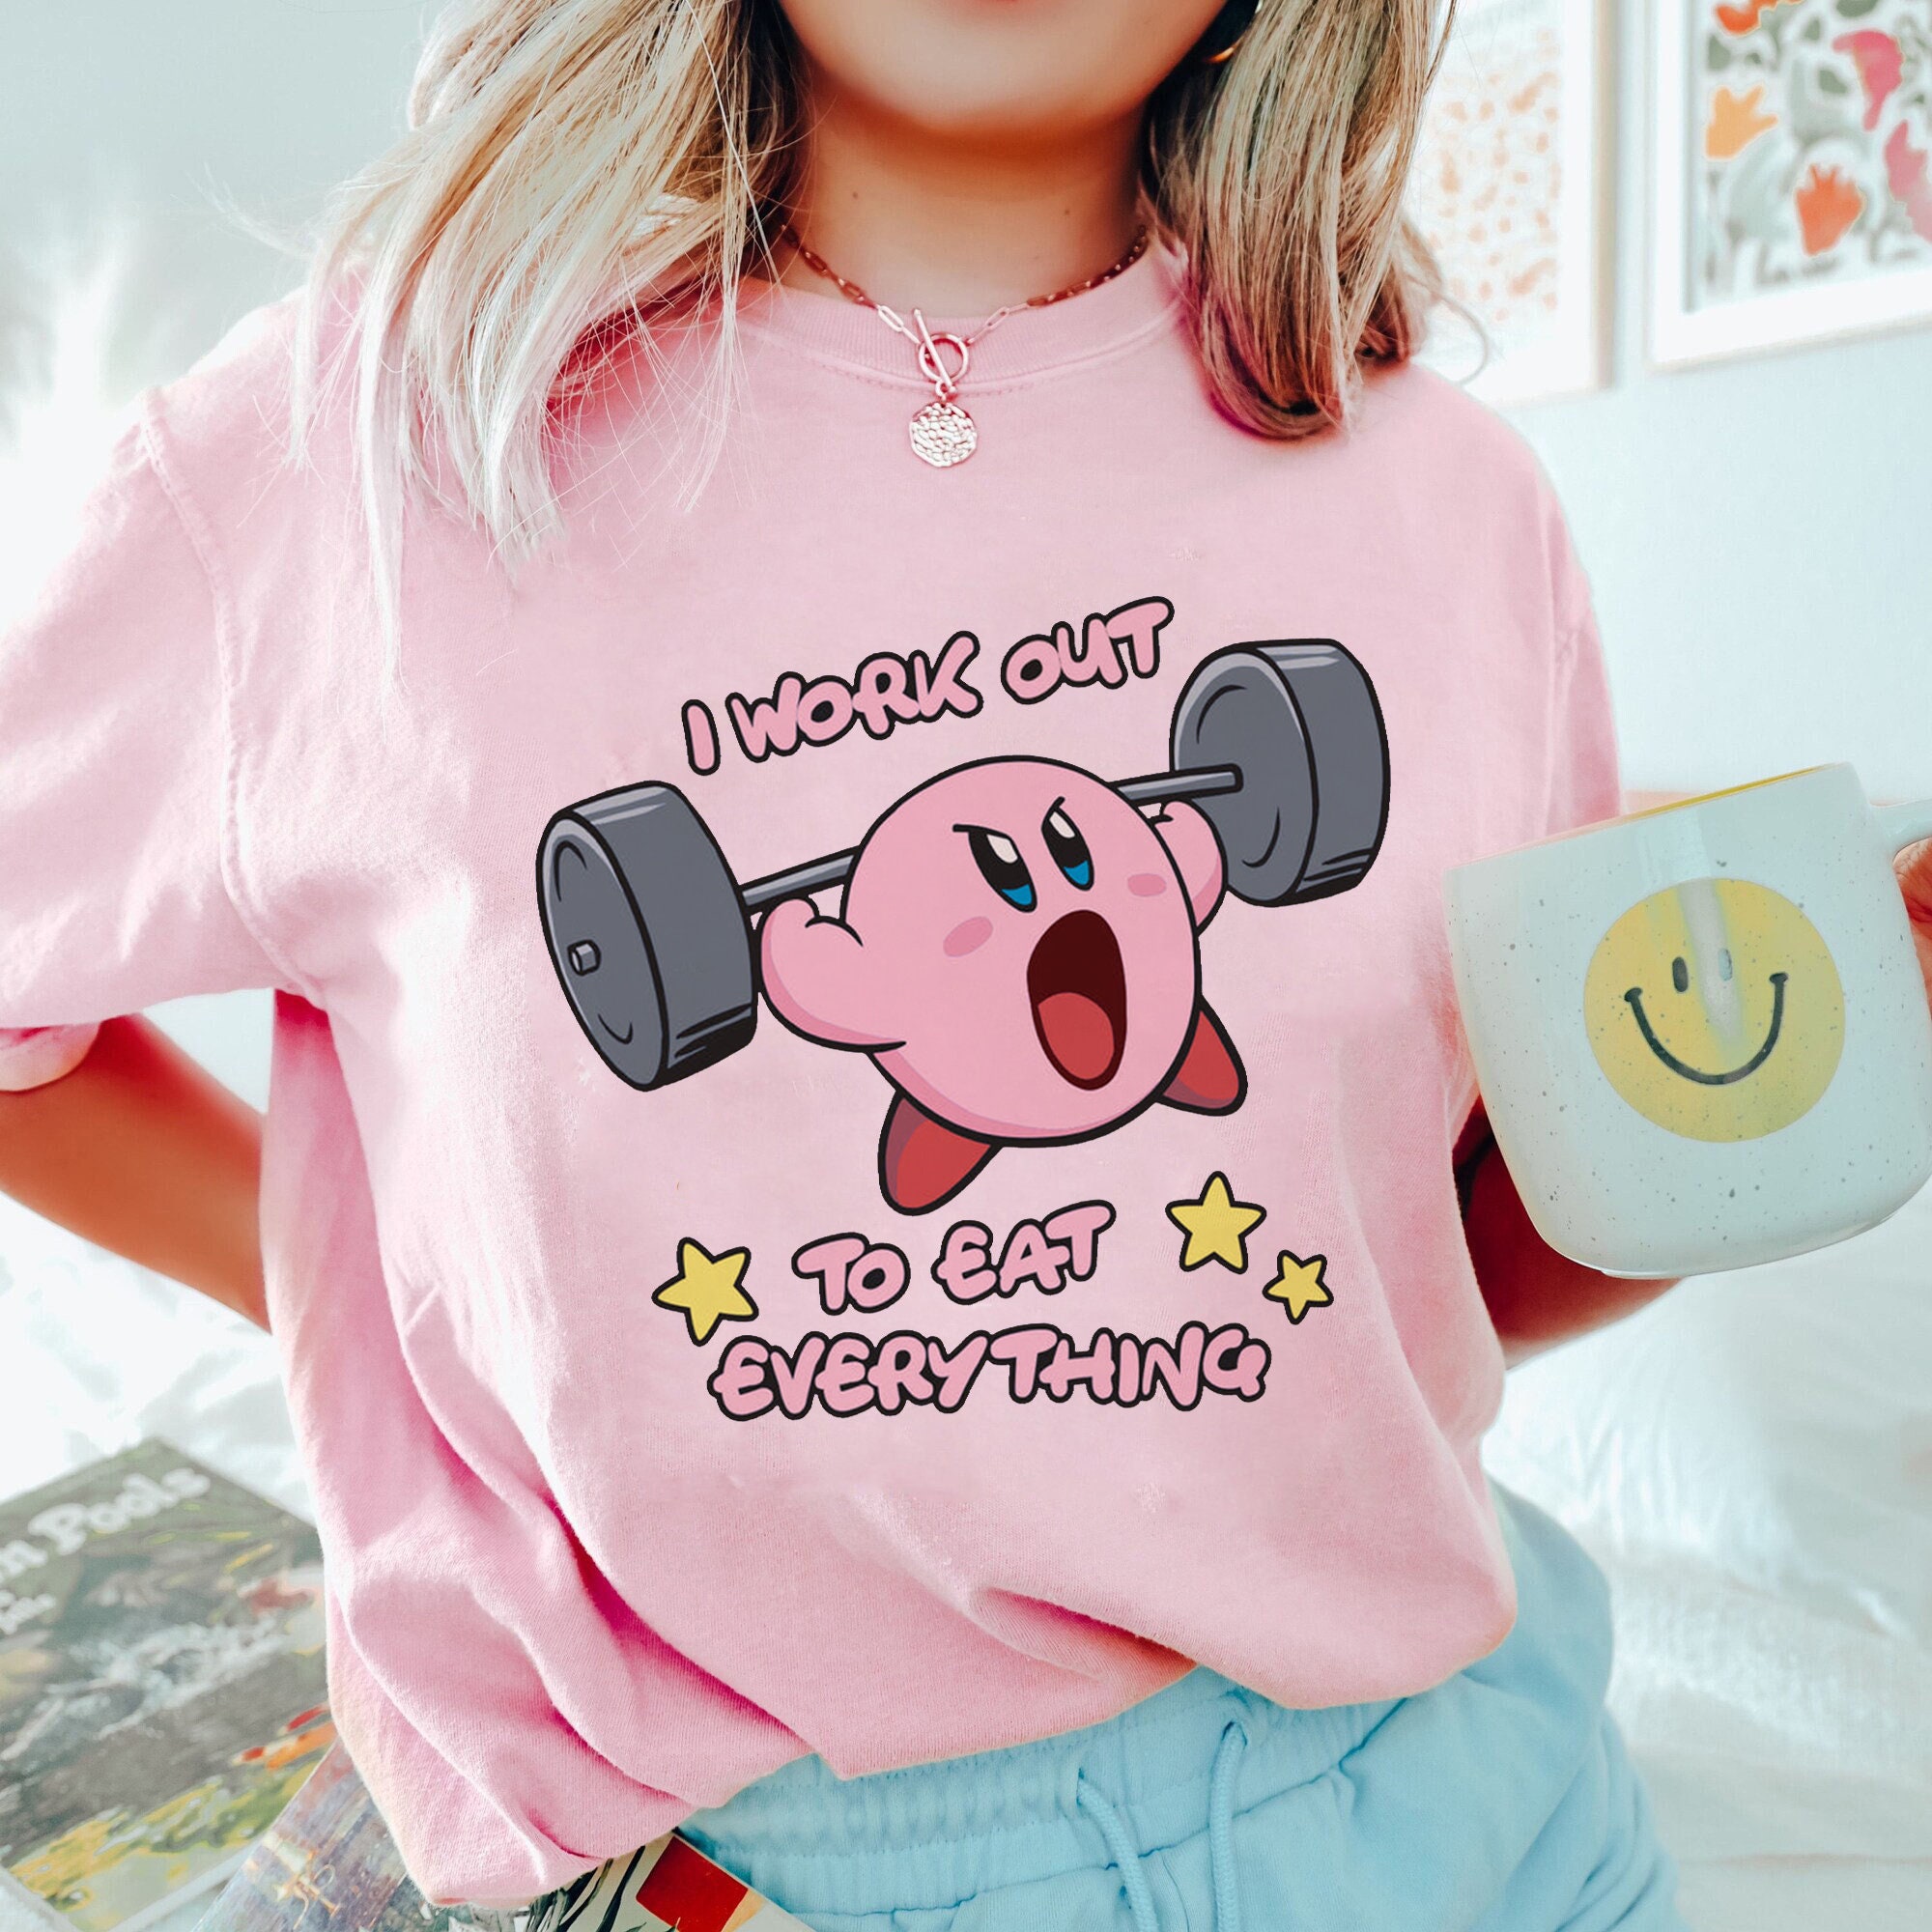 I Work Out to Eat Everything (Kirby) Coffee Mugs